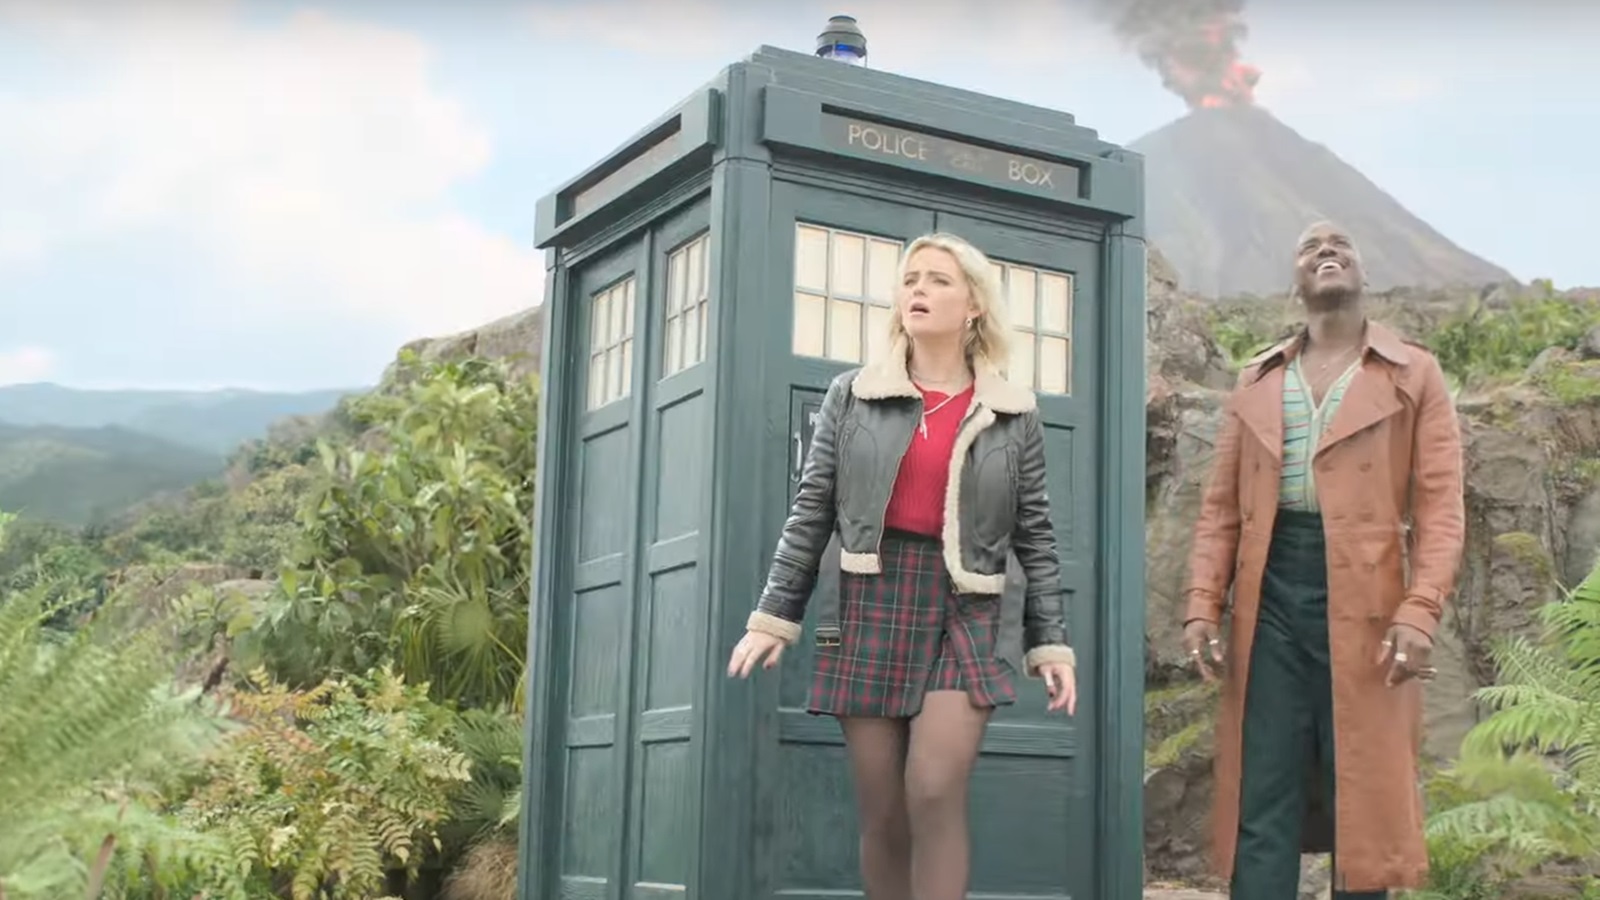 Doctor Who 14: the trailer for the first season with Ncuti Gatwa and Millie Gibson